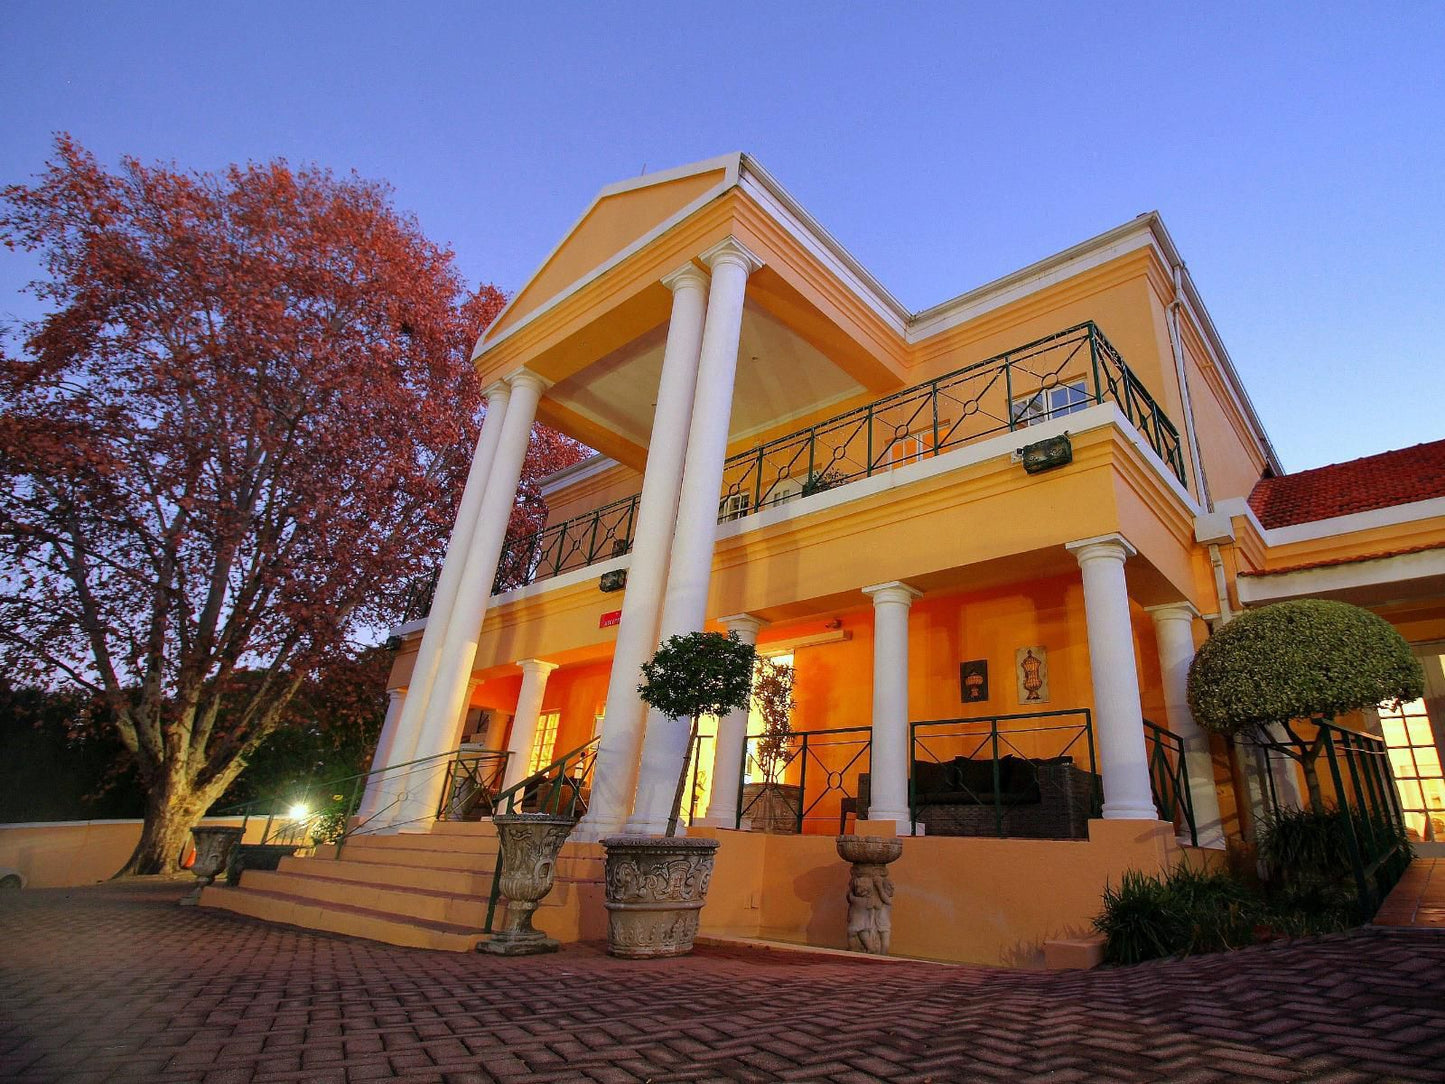 Little Tuscany Boutique Hotel Bryanston Johannesburg Gauteng South Africa Complementary Colors, House, Building, Architecture